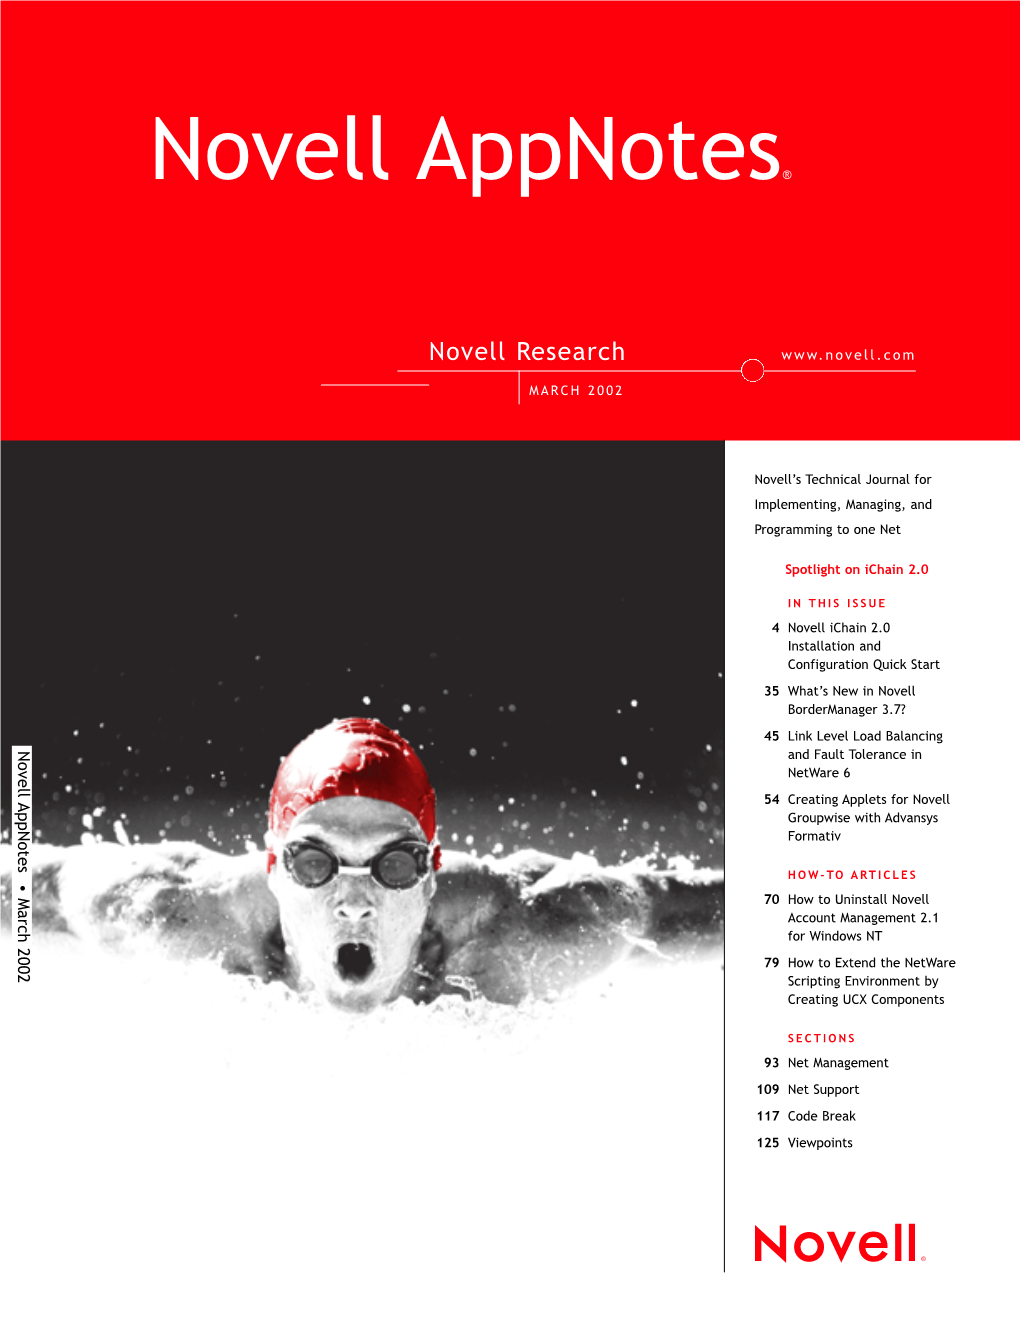 Novell Appnotes March 2002